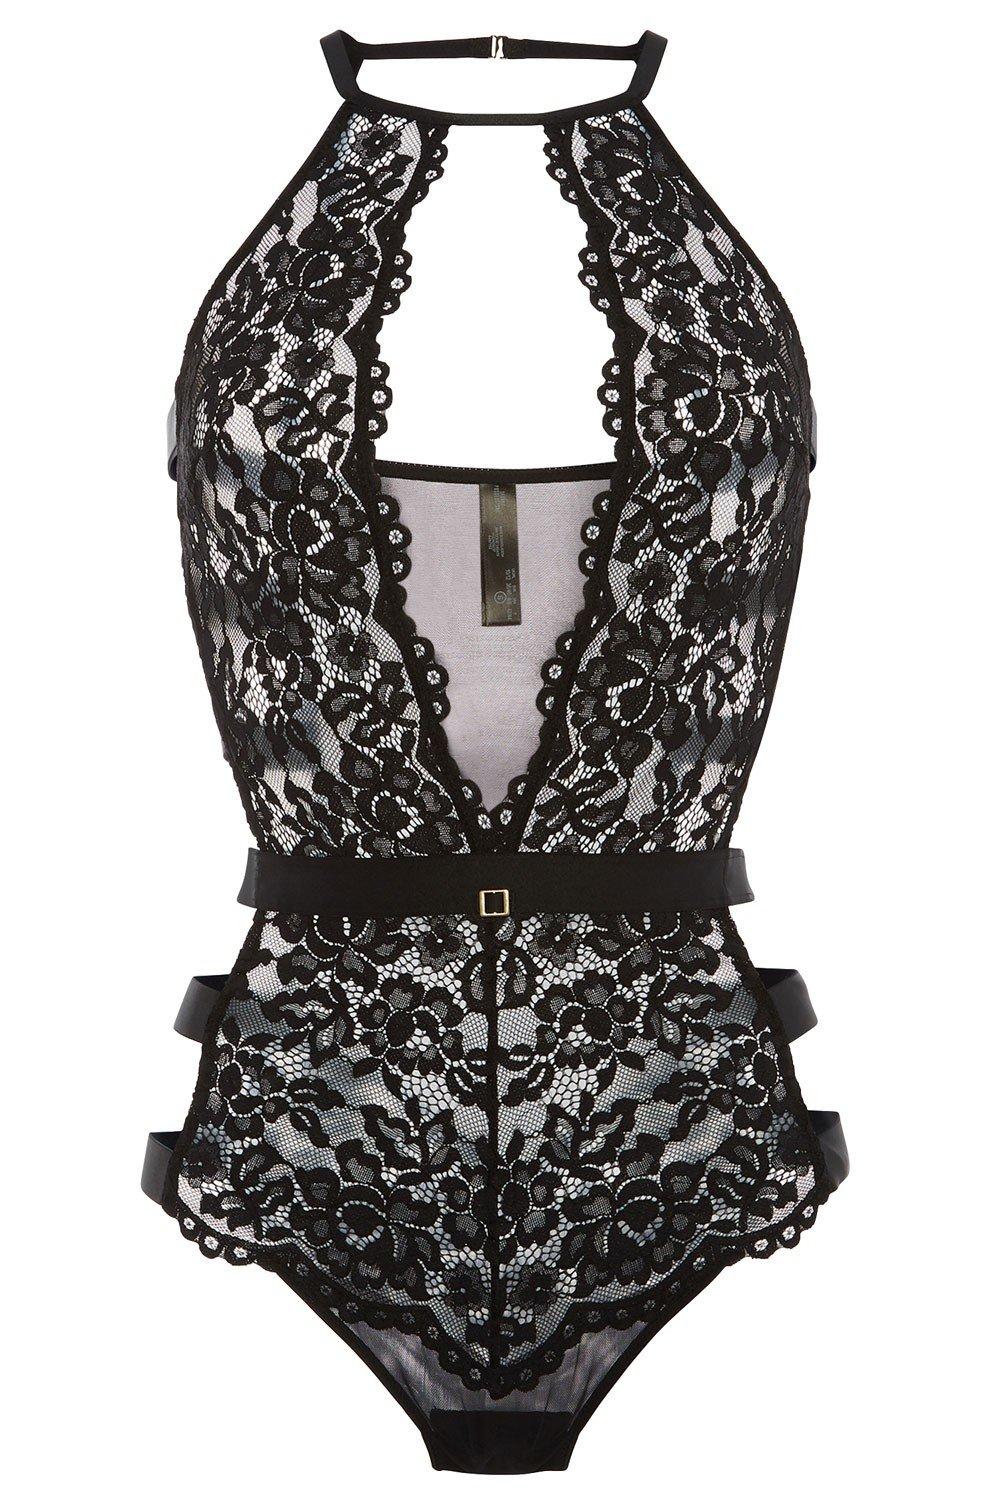 Primark Valentine's Day Collection: The Best Gifts and Lingerie ...